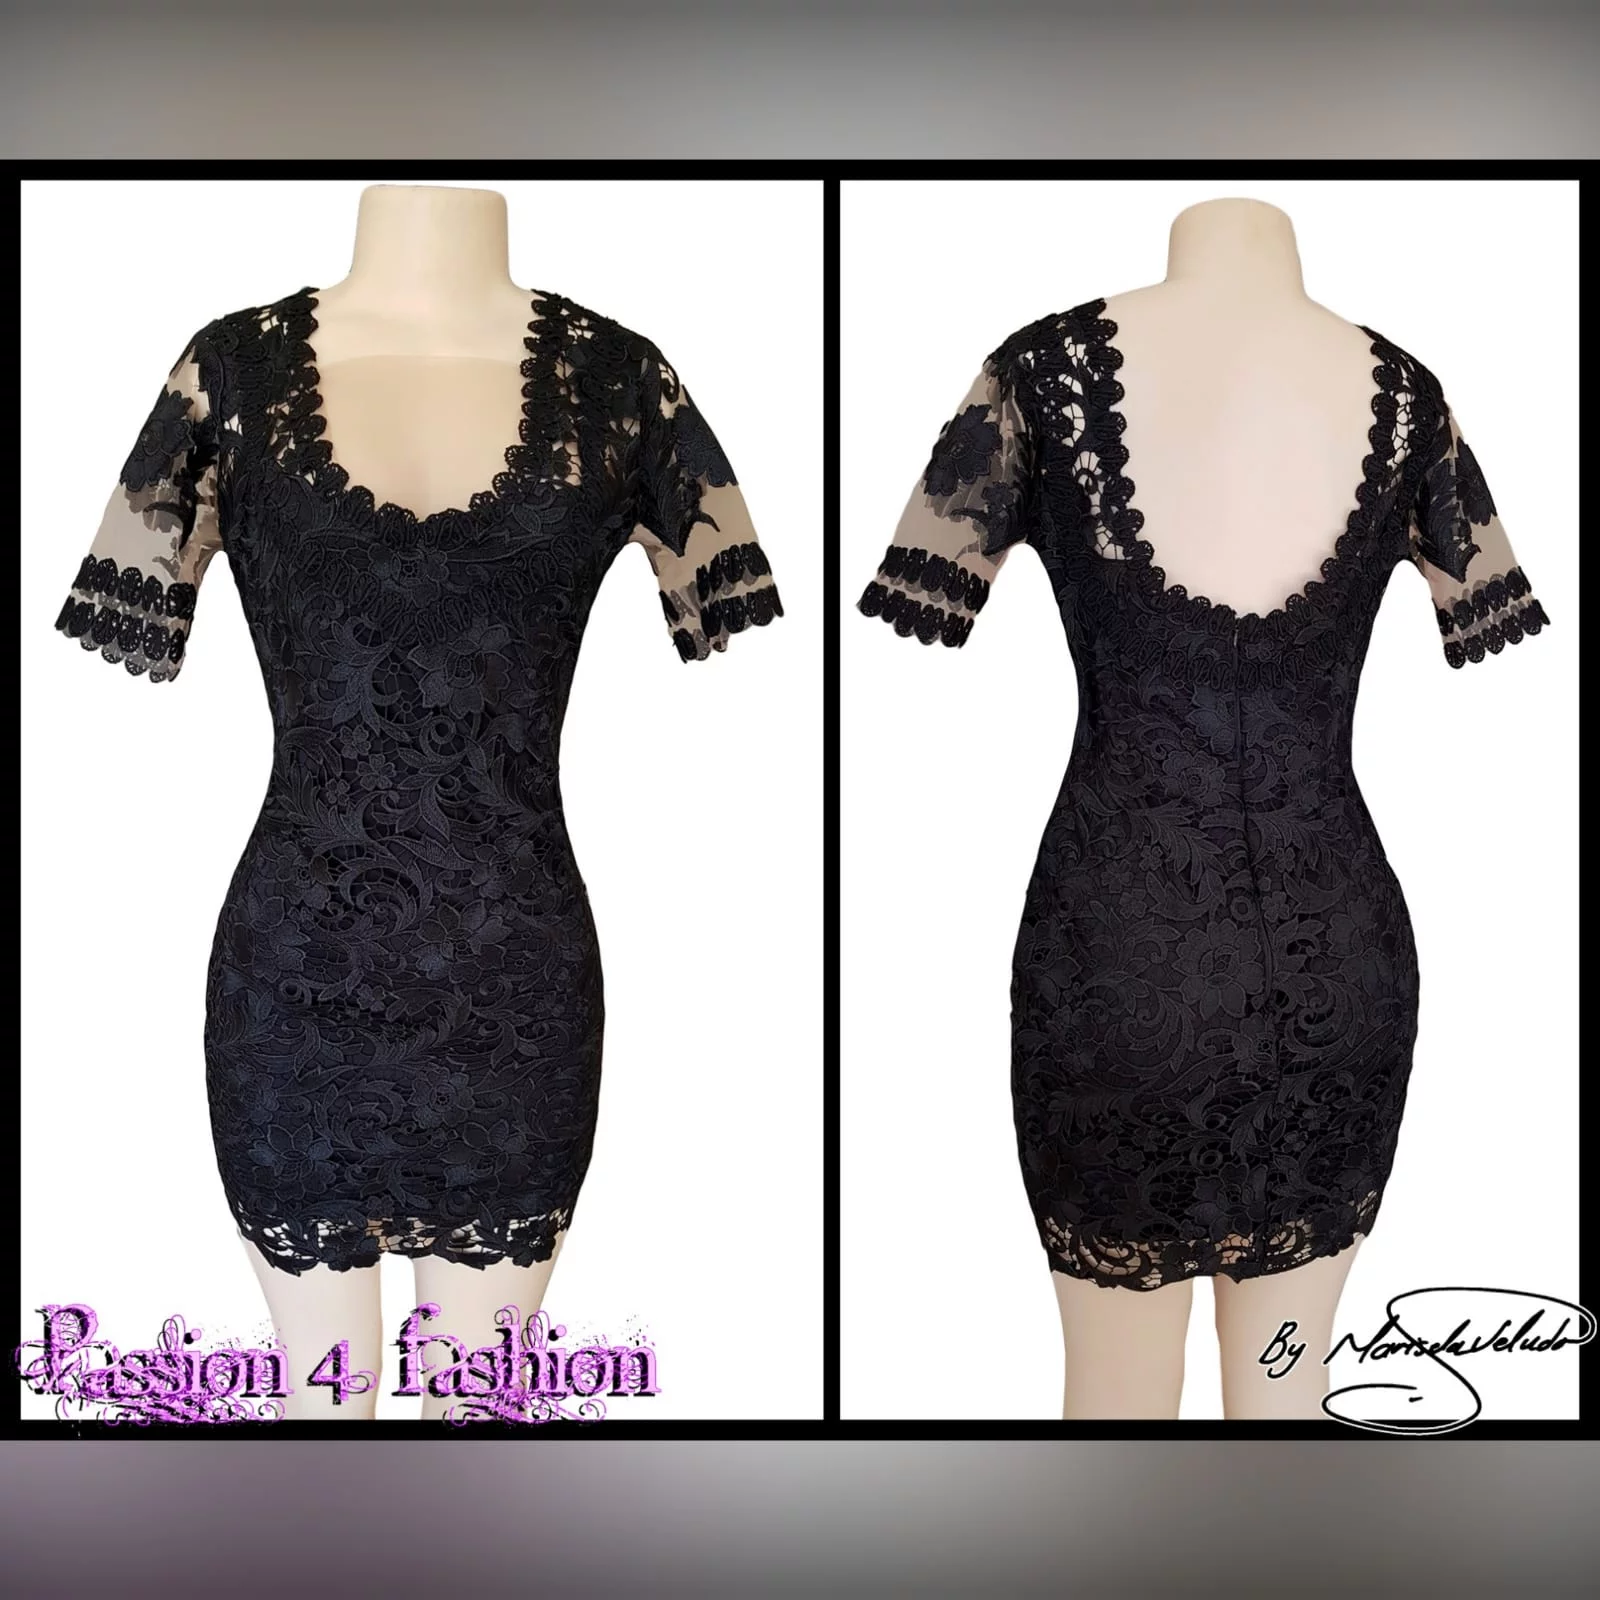 Black short guipure lace evening dress 4 black short guipure lace evening dress with a rounded front and back neckline. With sheers short sleeves detailed with lace.